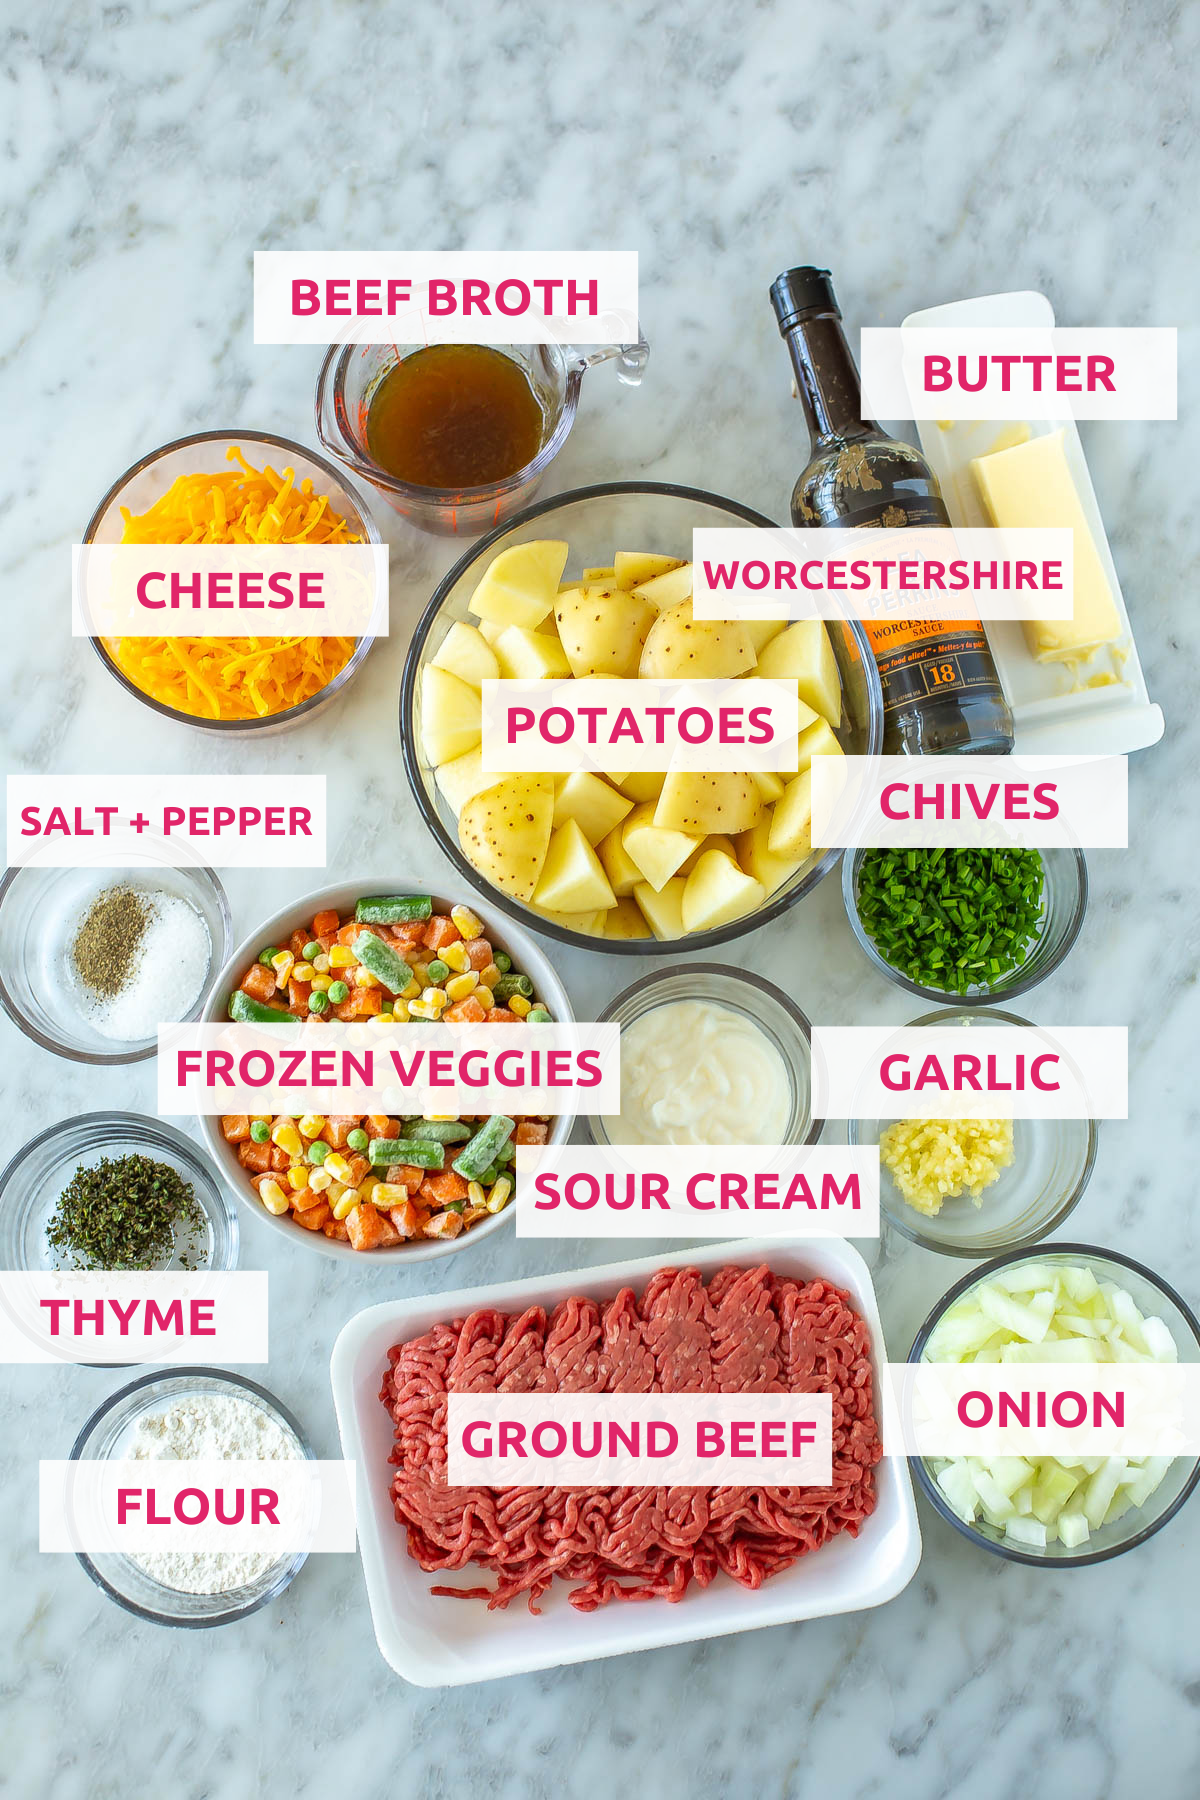 Ingredients for classic shepherd's pie: beef broth, cheese, butter, potatoes, worcestershire, frozen veggies, thyme, chives, sour cream, garlic, ground beef, onion, flour, salt and pepper.